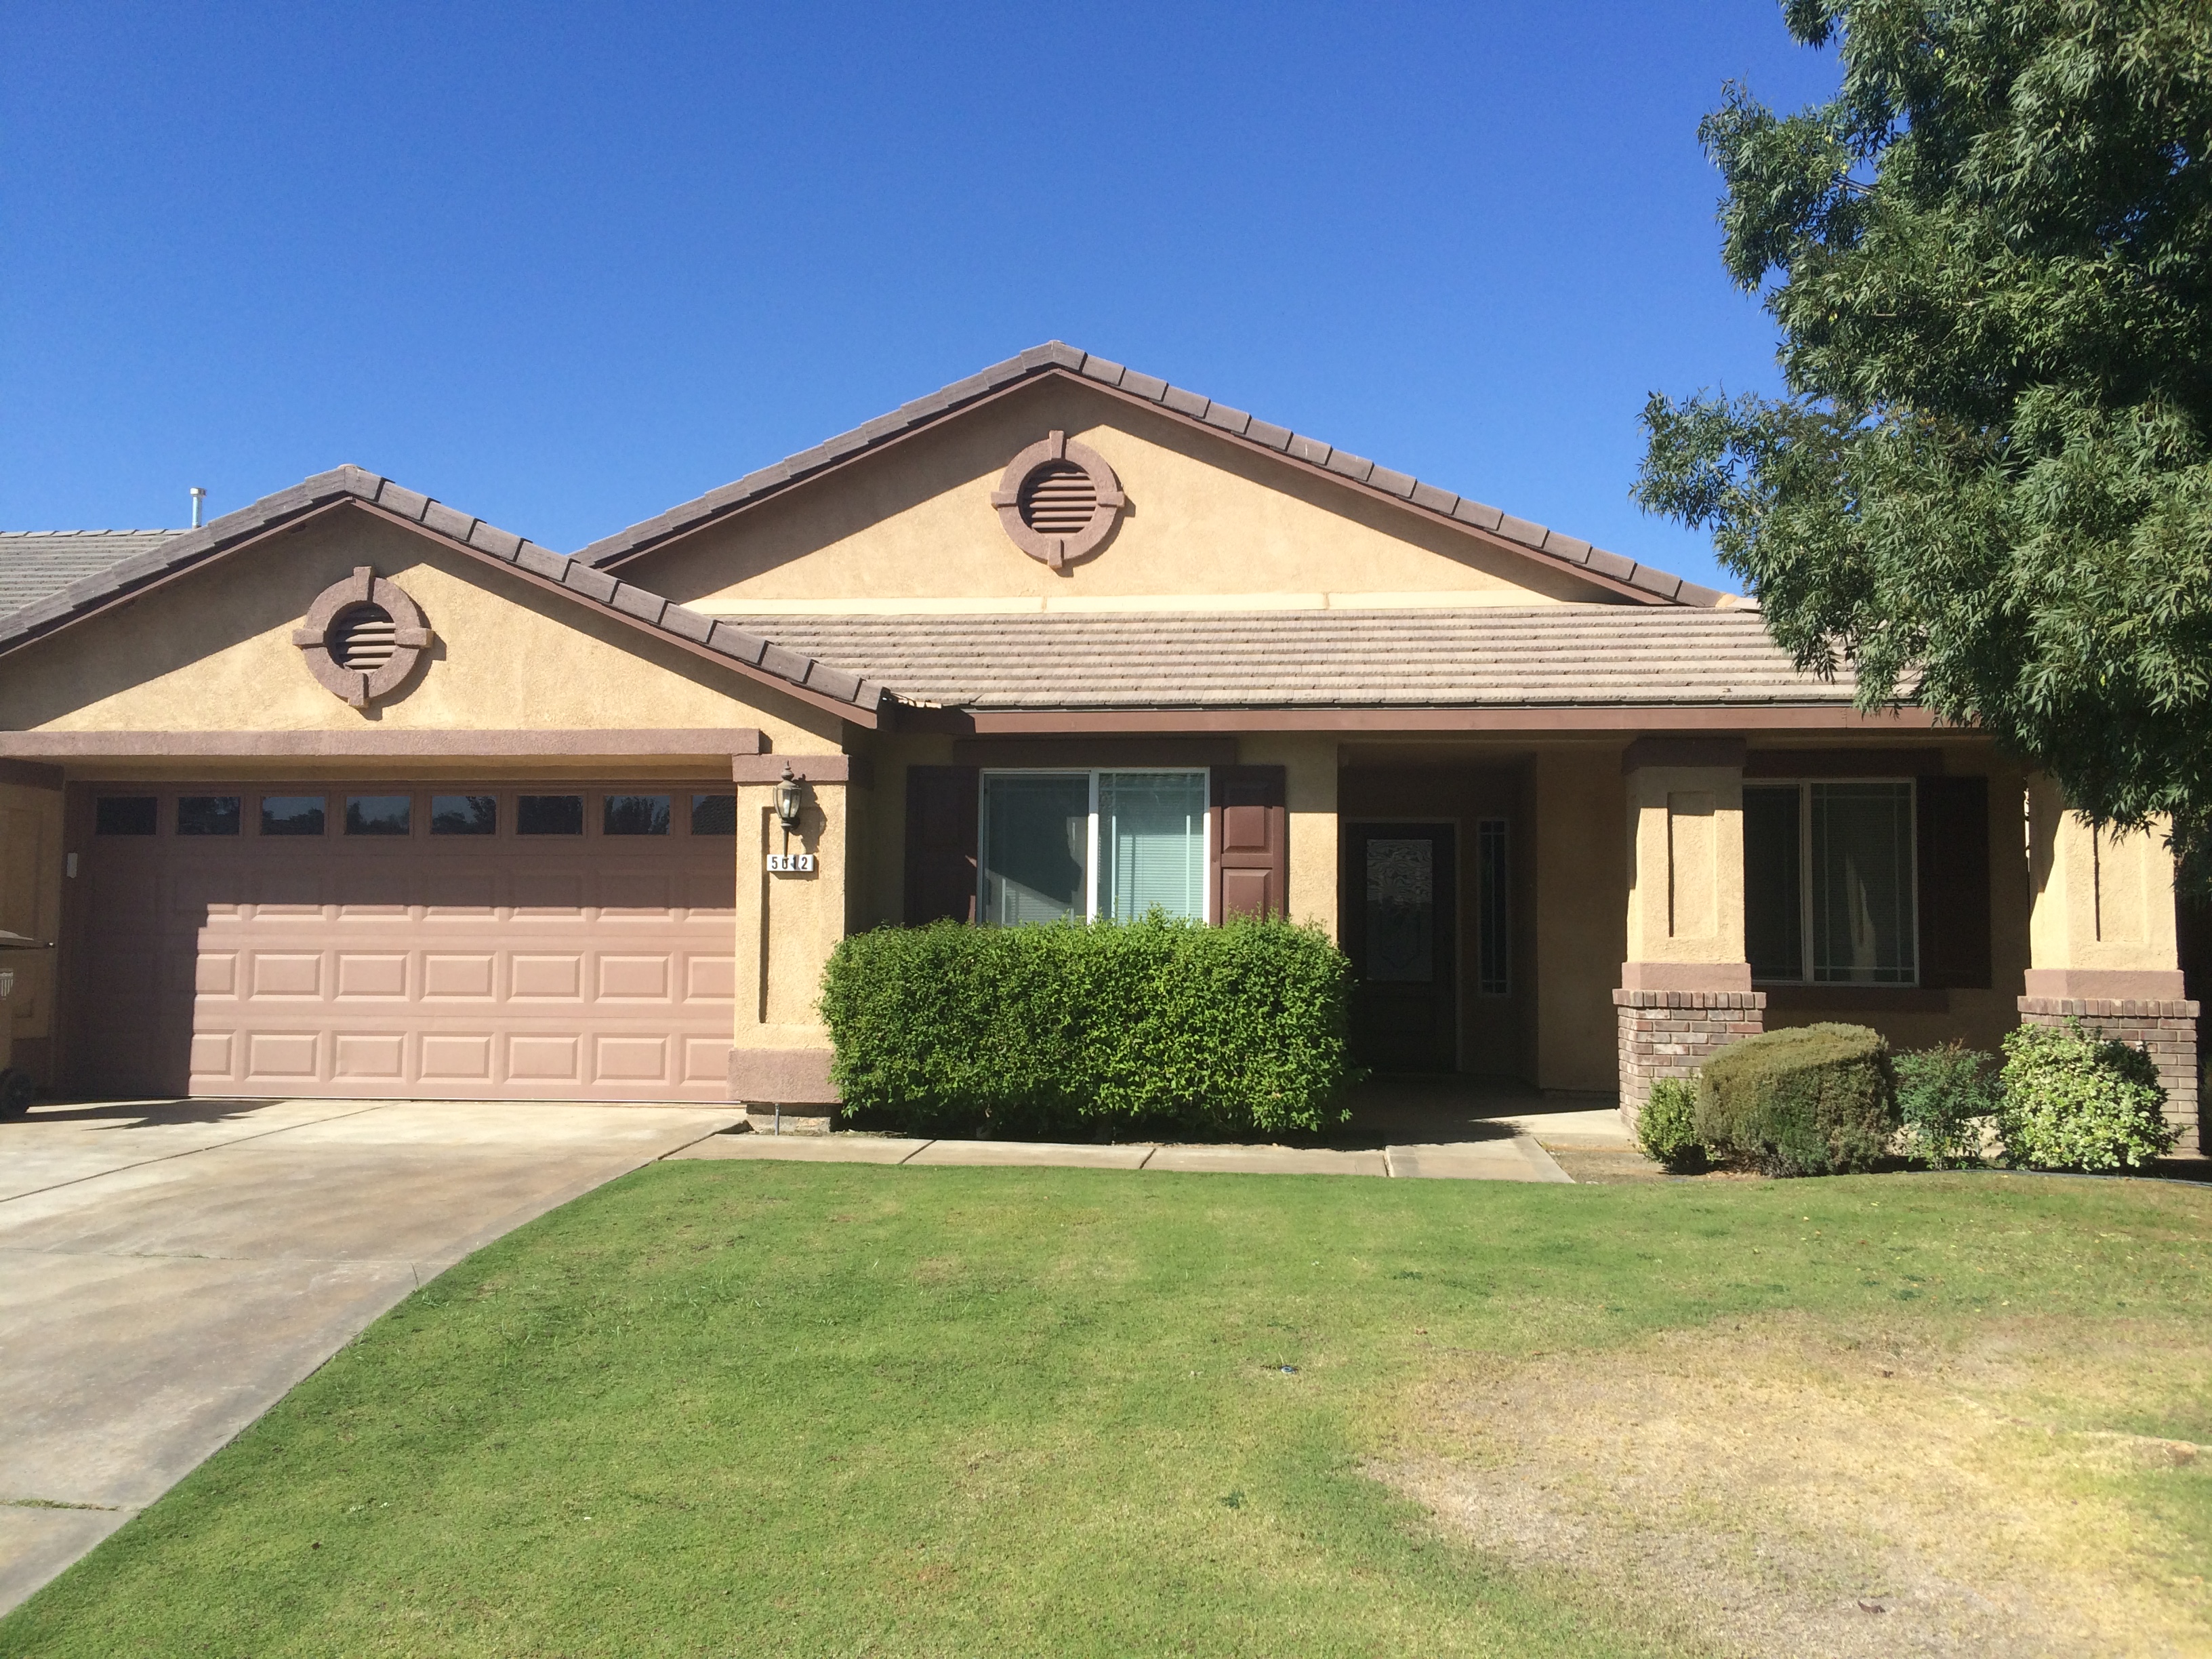 $1900 -5012 Winter Pasture Ave., Bakersfield, CA 93313 Southwest Home Has Been Rented!